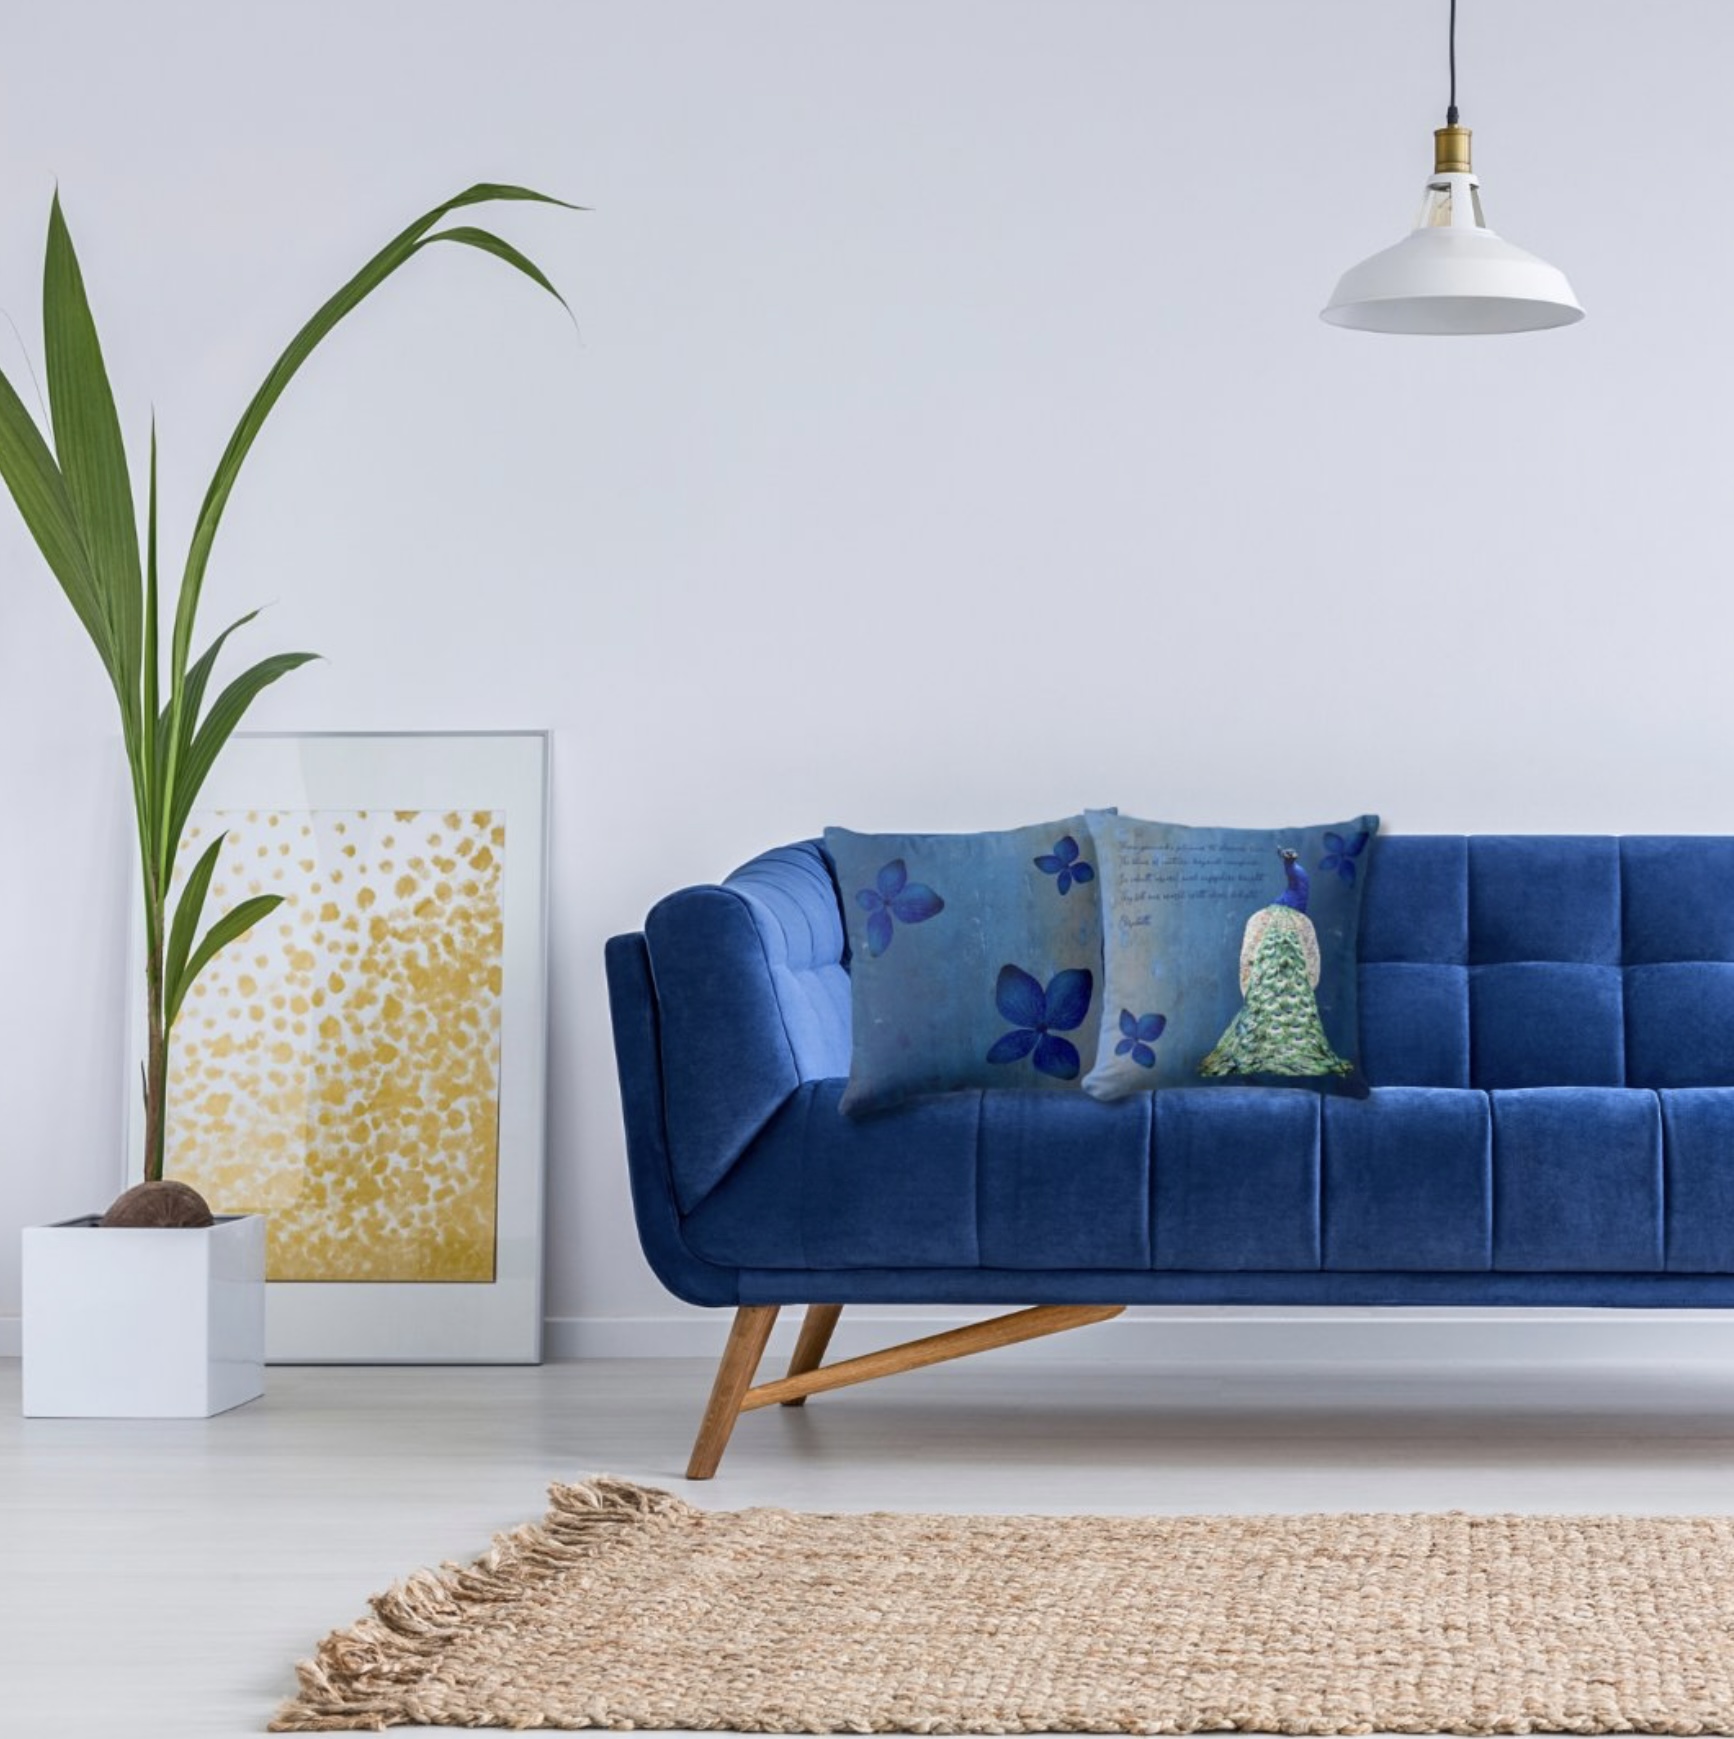 Vintage Peacock Custom Double Sided Pillow showcased against a cobalt blue sofa, creating an eclectic look.